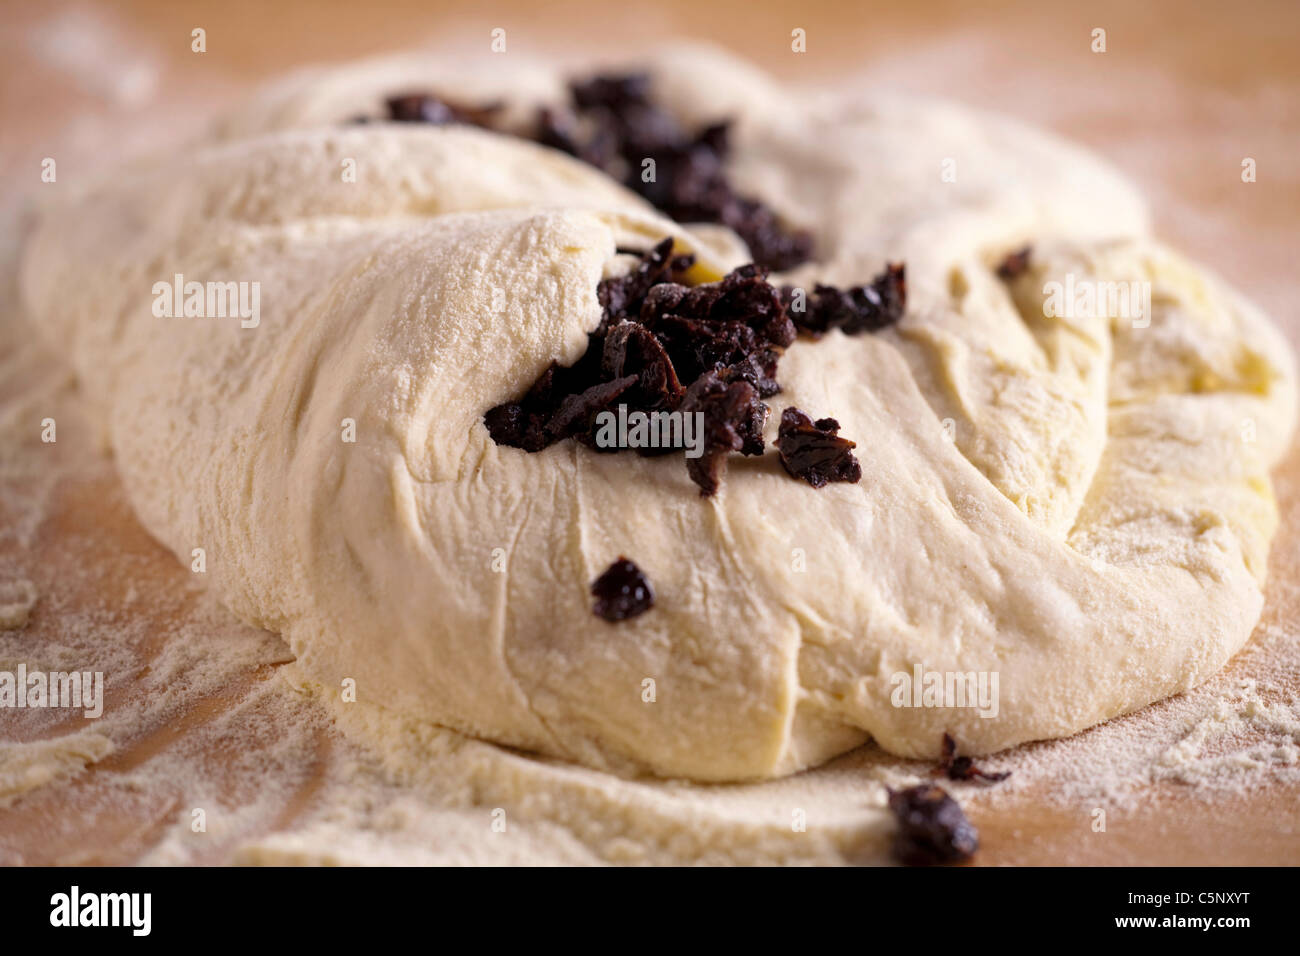 Grissini dough with black olives Stock Photo